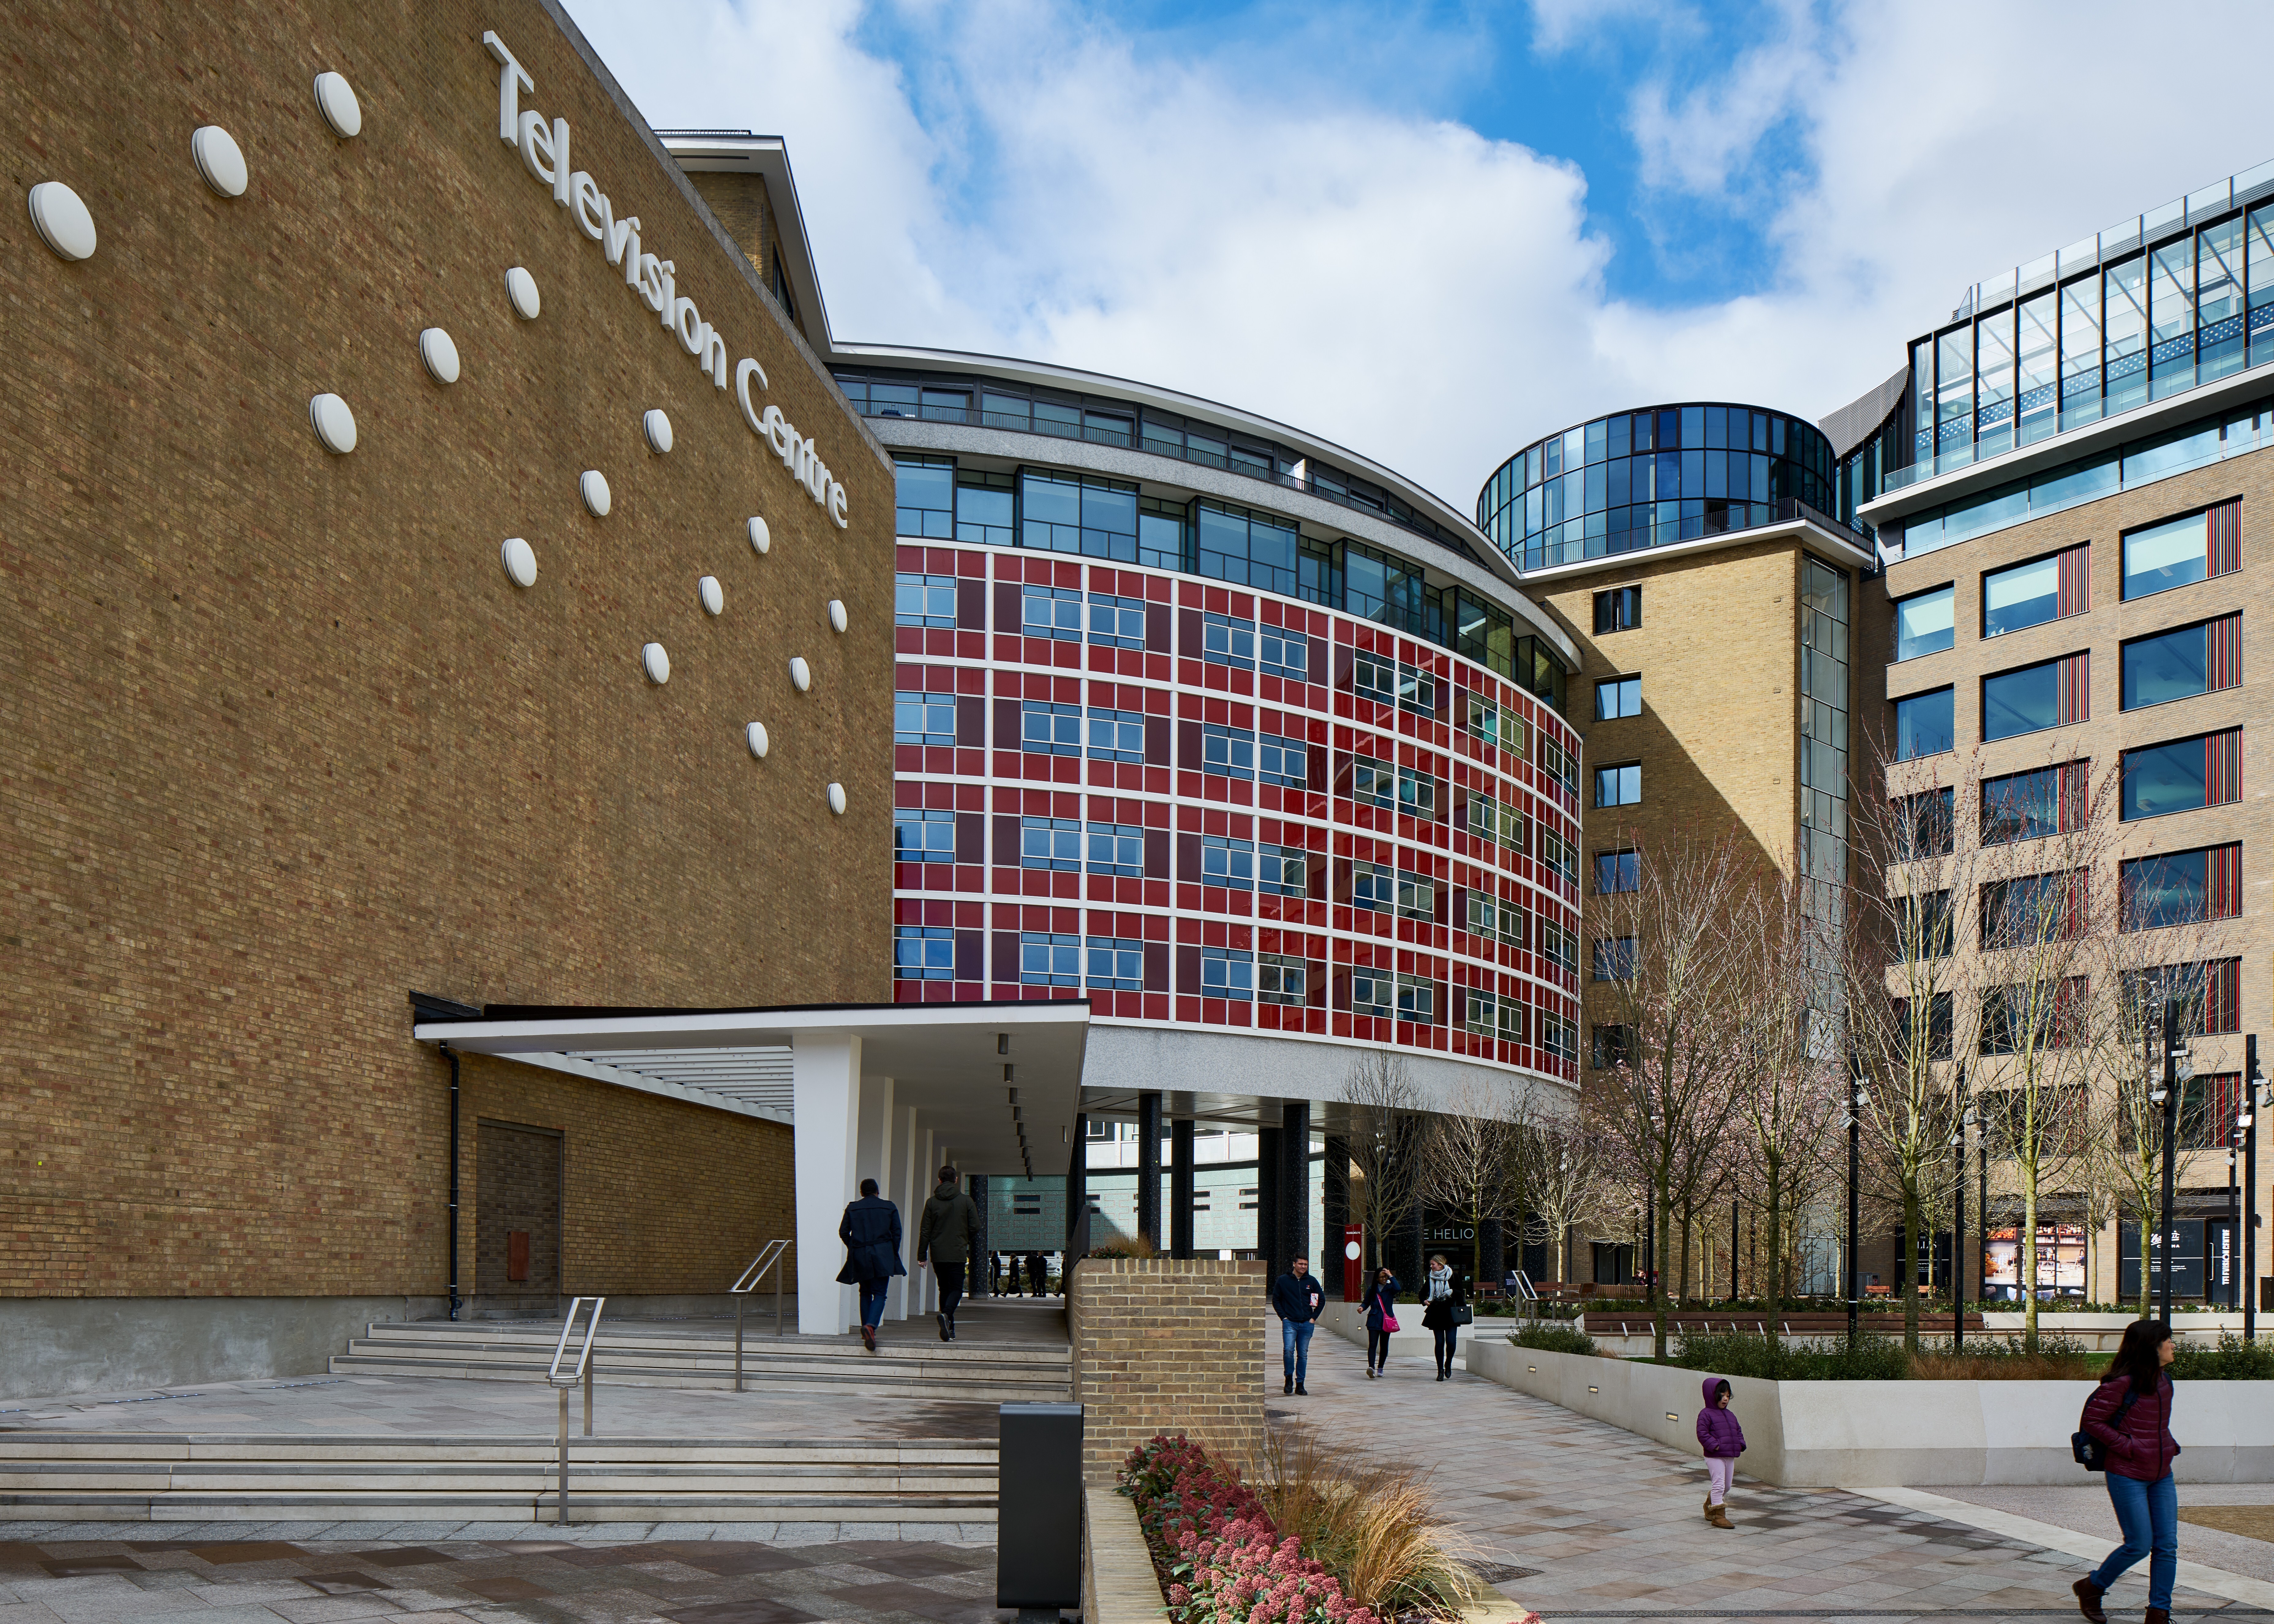 BBC’s former Television Centre building in West London has been redeveloped into luxury homes by Stanhope. Photo: handout